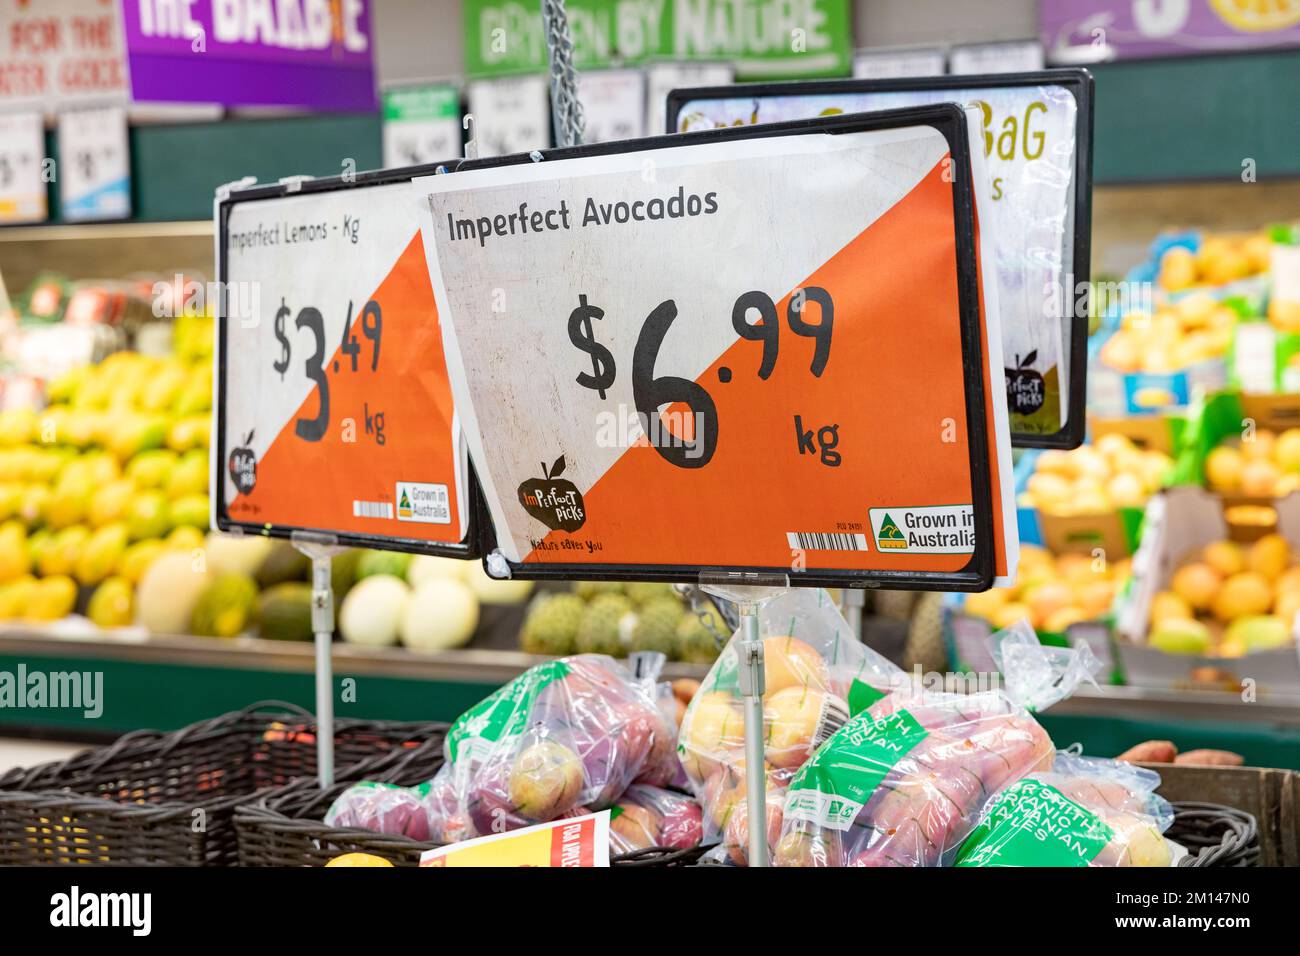 Imperfect avocados and imperfect lemons being sold in a Harris Farm supermarket in Sydney, price per kg displayed on the store sign, help reduce waste Stock Photo